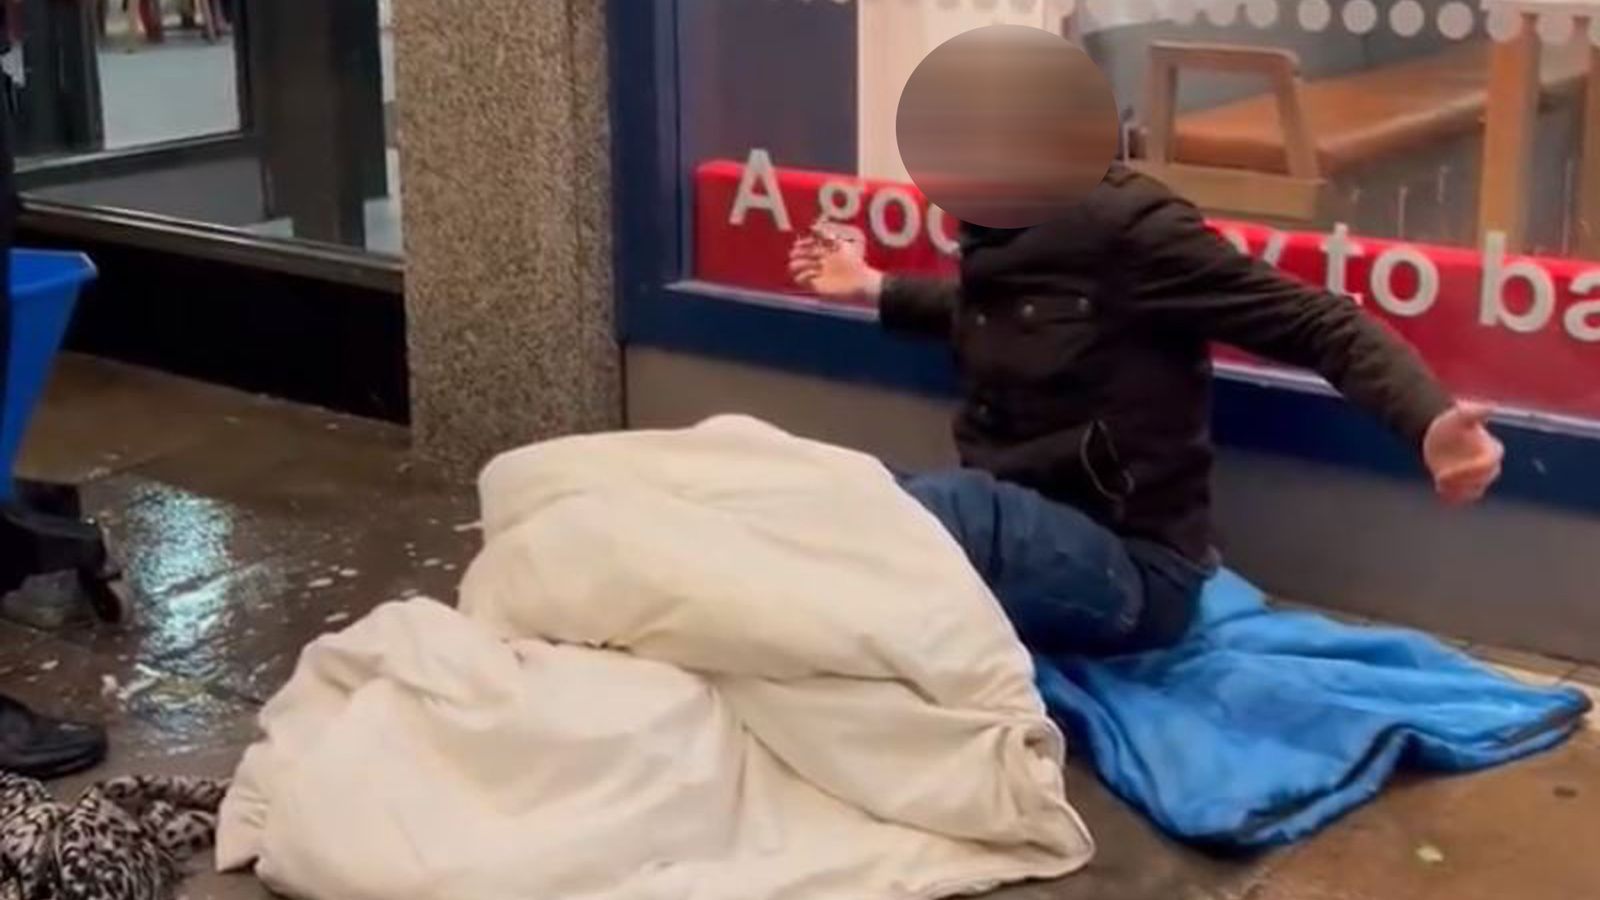 'Bang out of order': Anger as security guard mops floor where homeless man is sitting